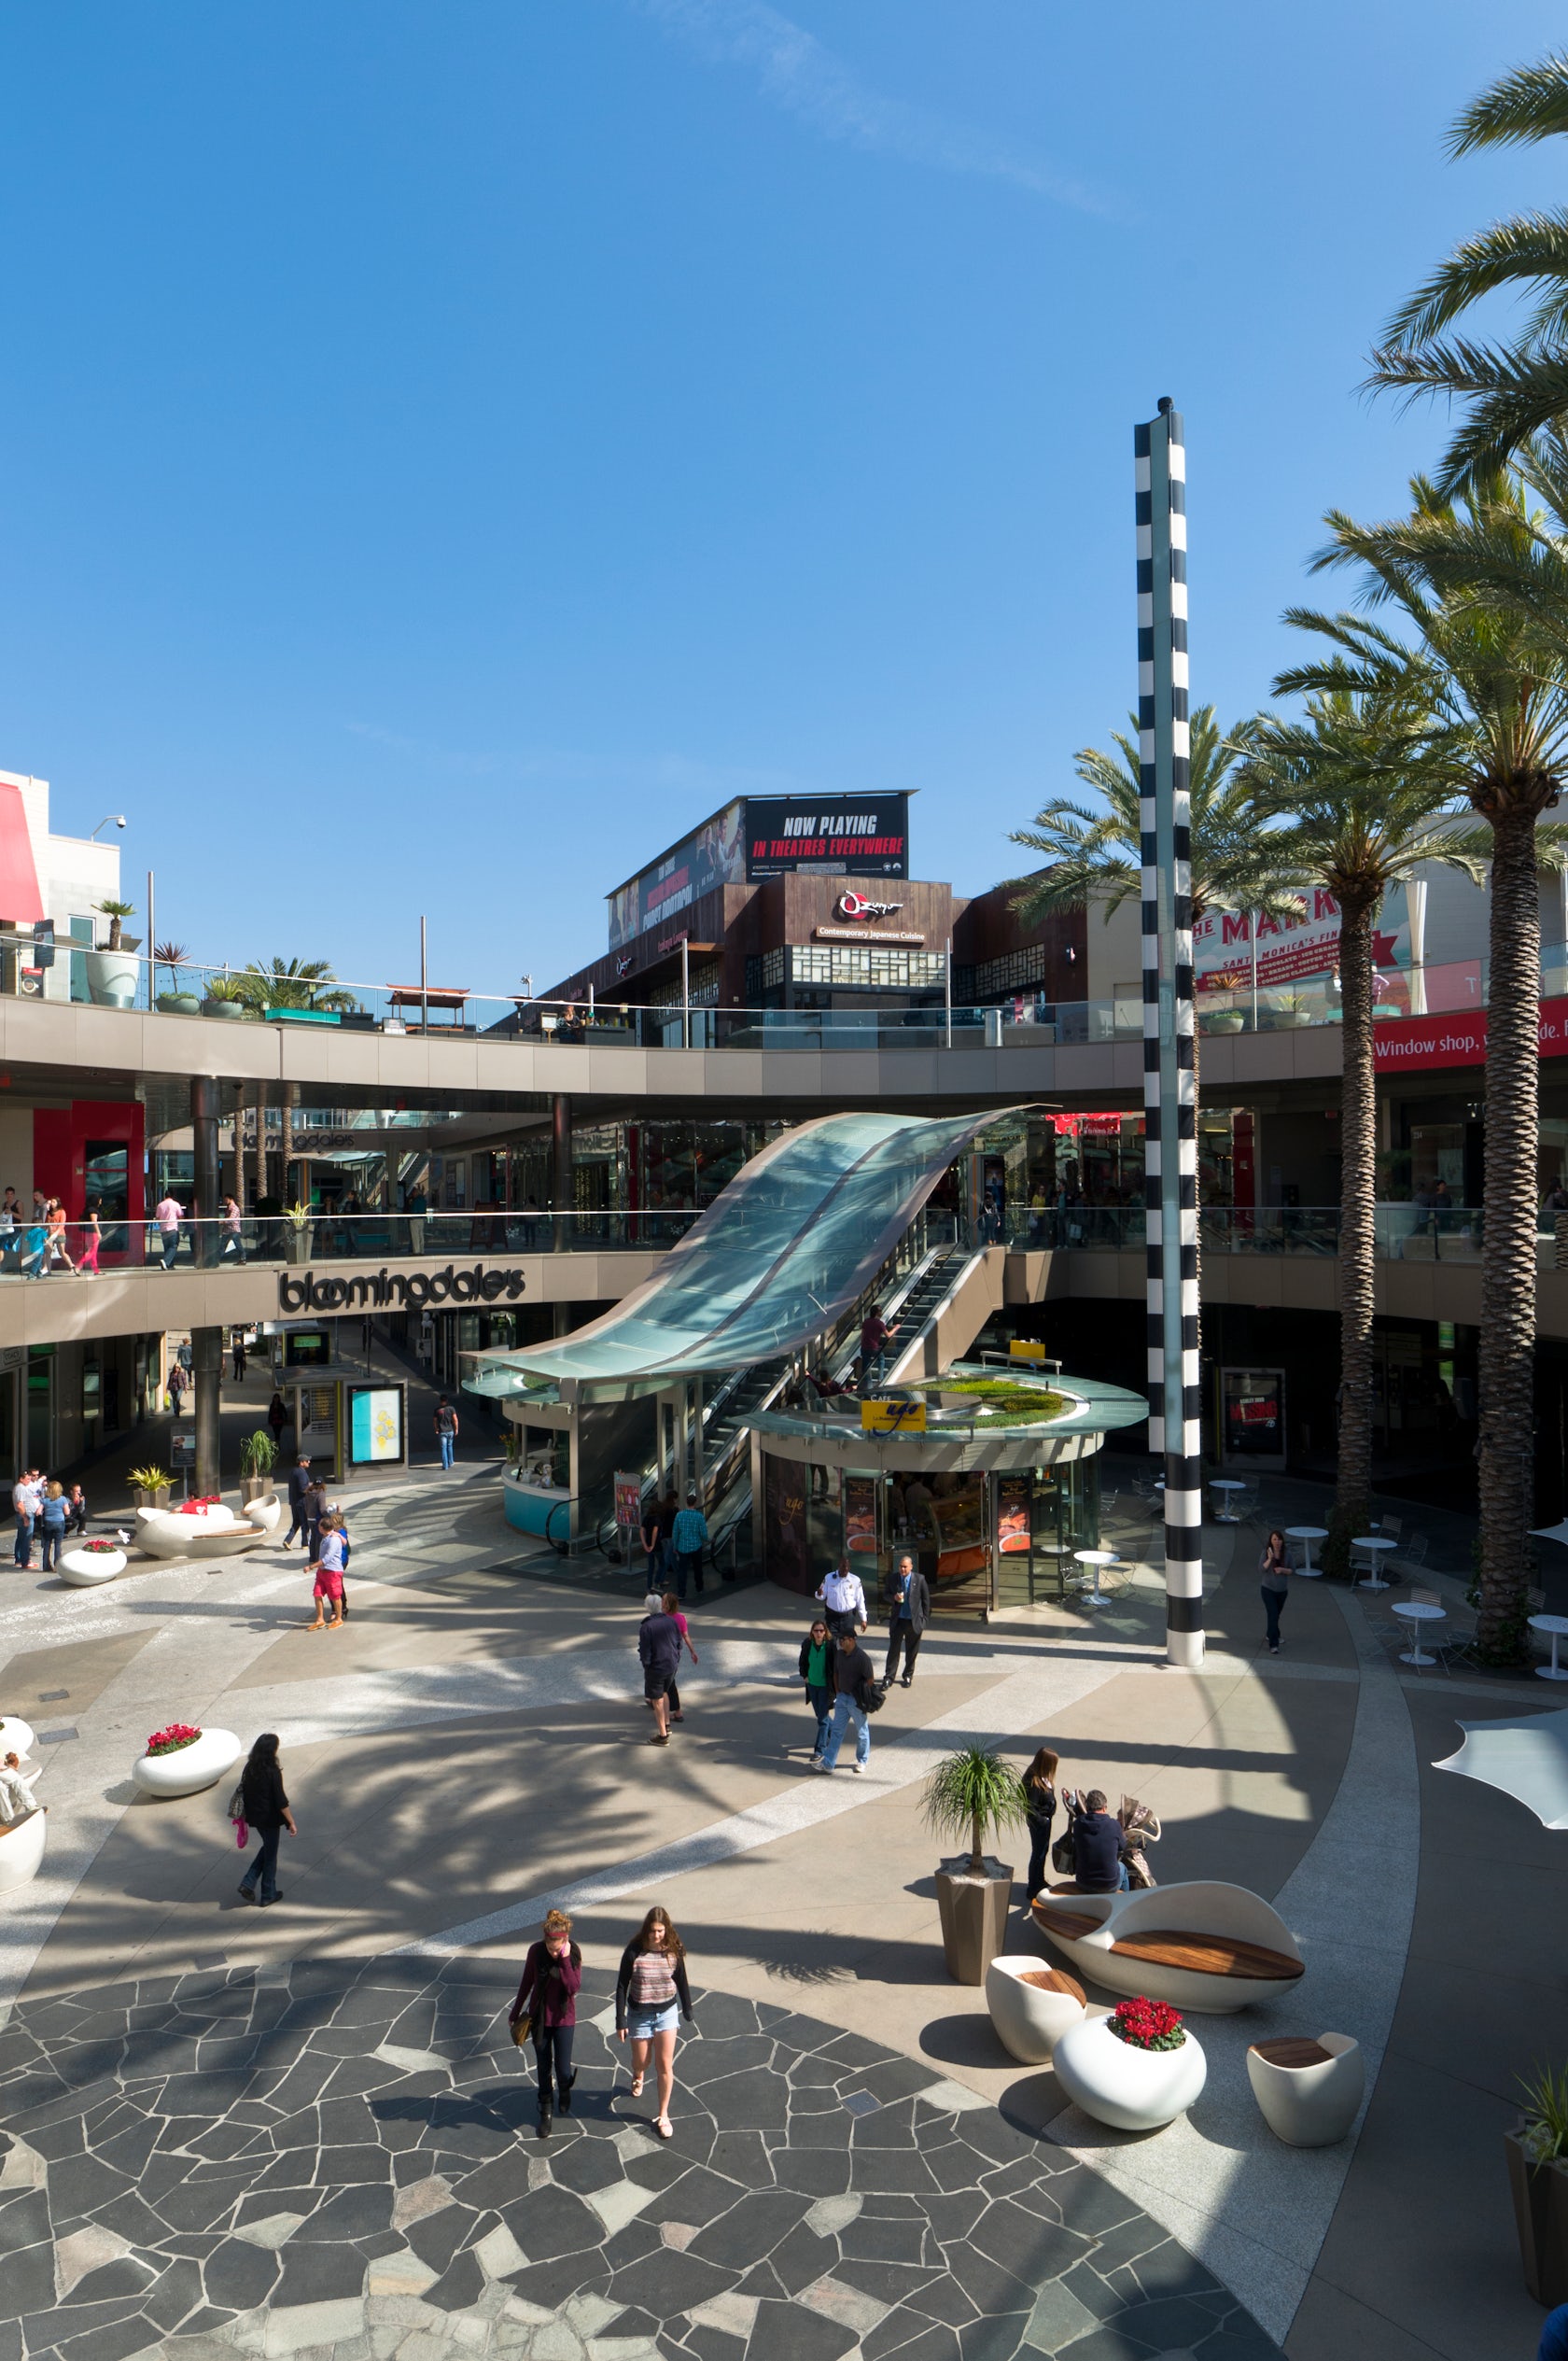 Santa Monica Place Swaps Gehry for Airy